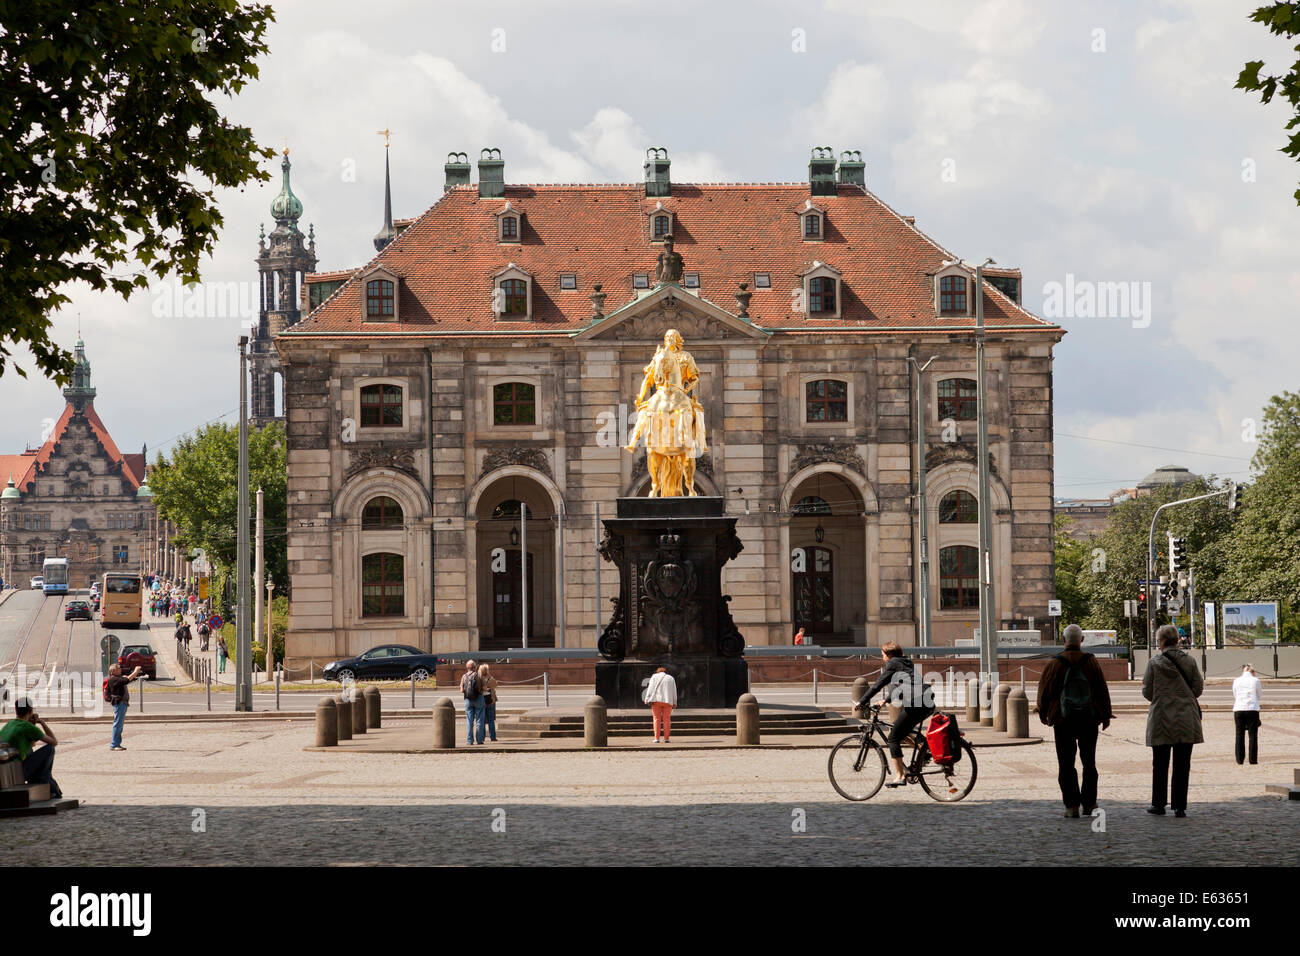 The Goldener Reiter or Golden Rider, a gilded equestrian statue of Augustus the strong, Neustädter Markt in Dresden, Saxony, Stock Photo